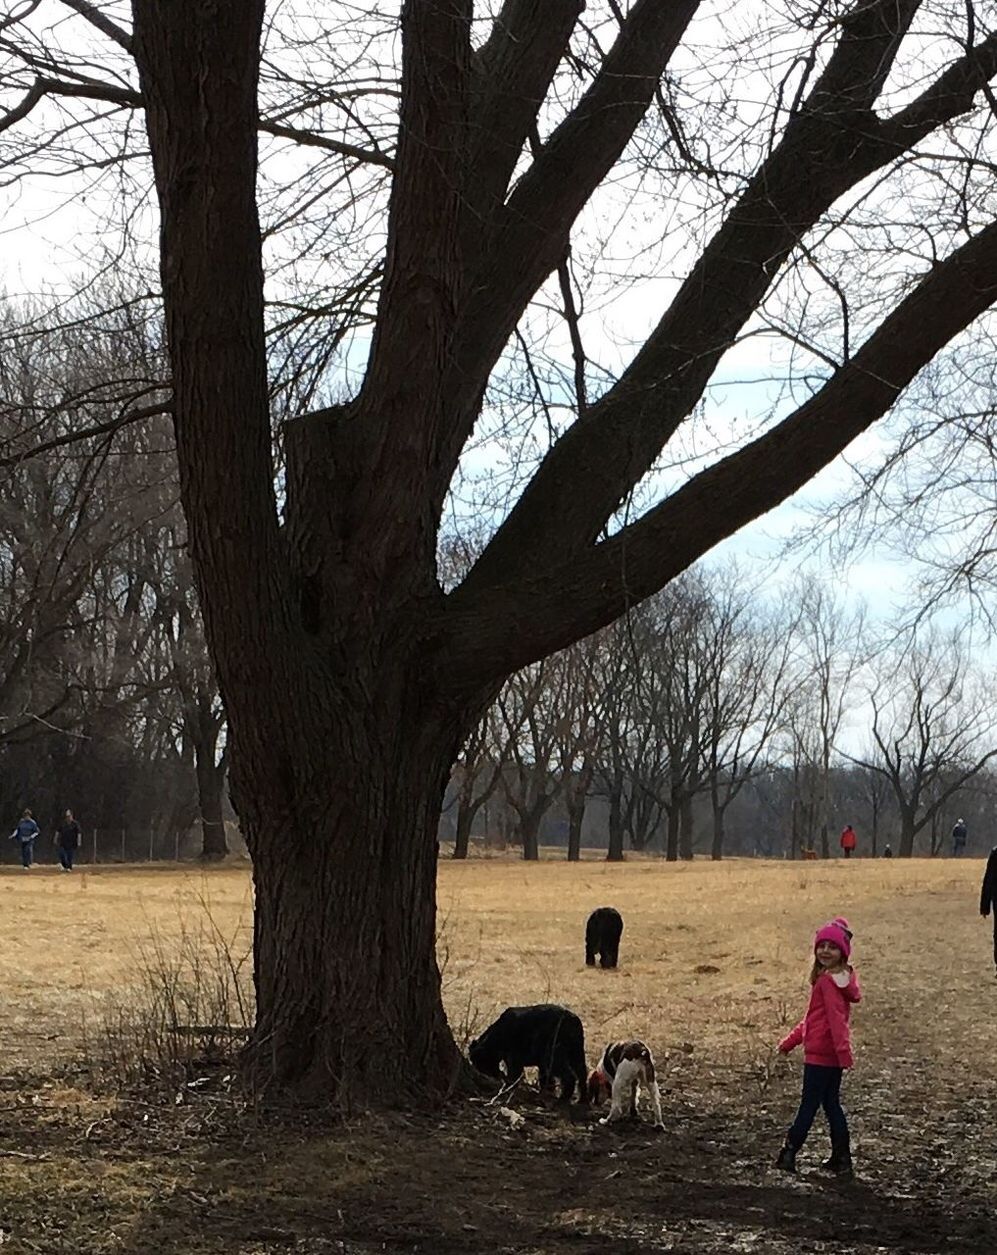 tree, tree trunk, childhood, leisure activity, full length, lifestyles, bare tree, child, park - man made space, playing, tranquility, tranquil scene, field, nature, branch, day, outdoors, large, park, solitude, vacations, scenics